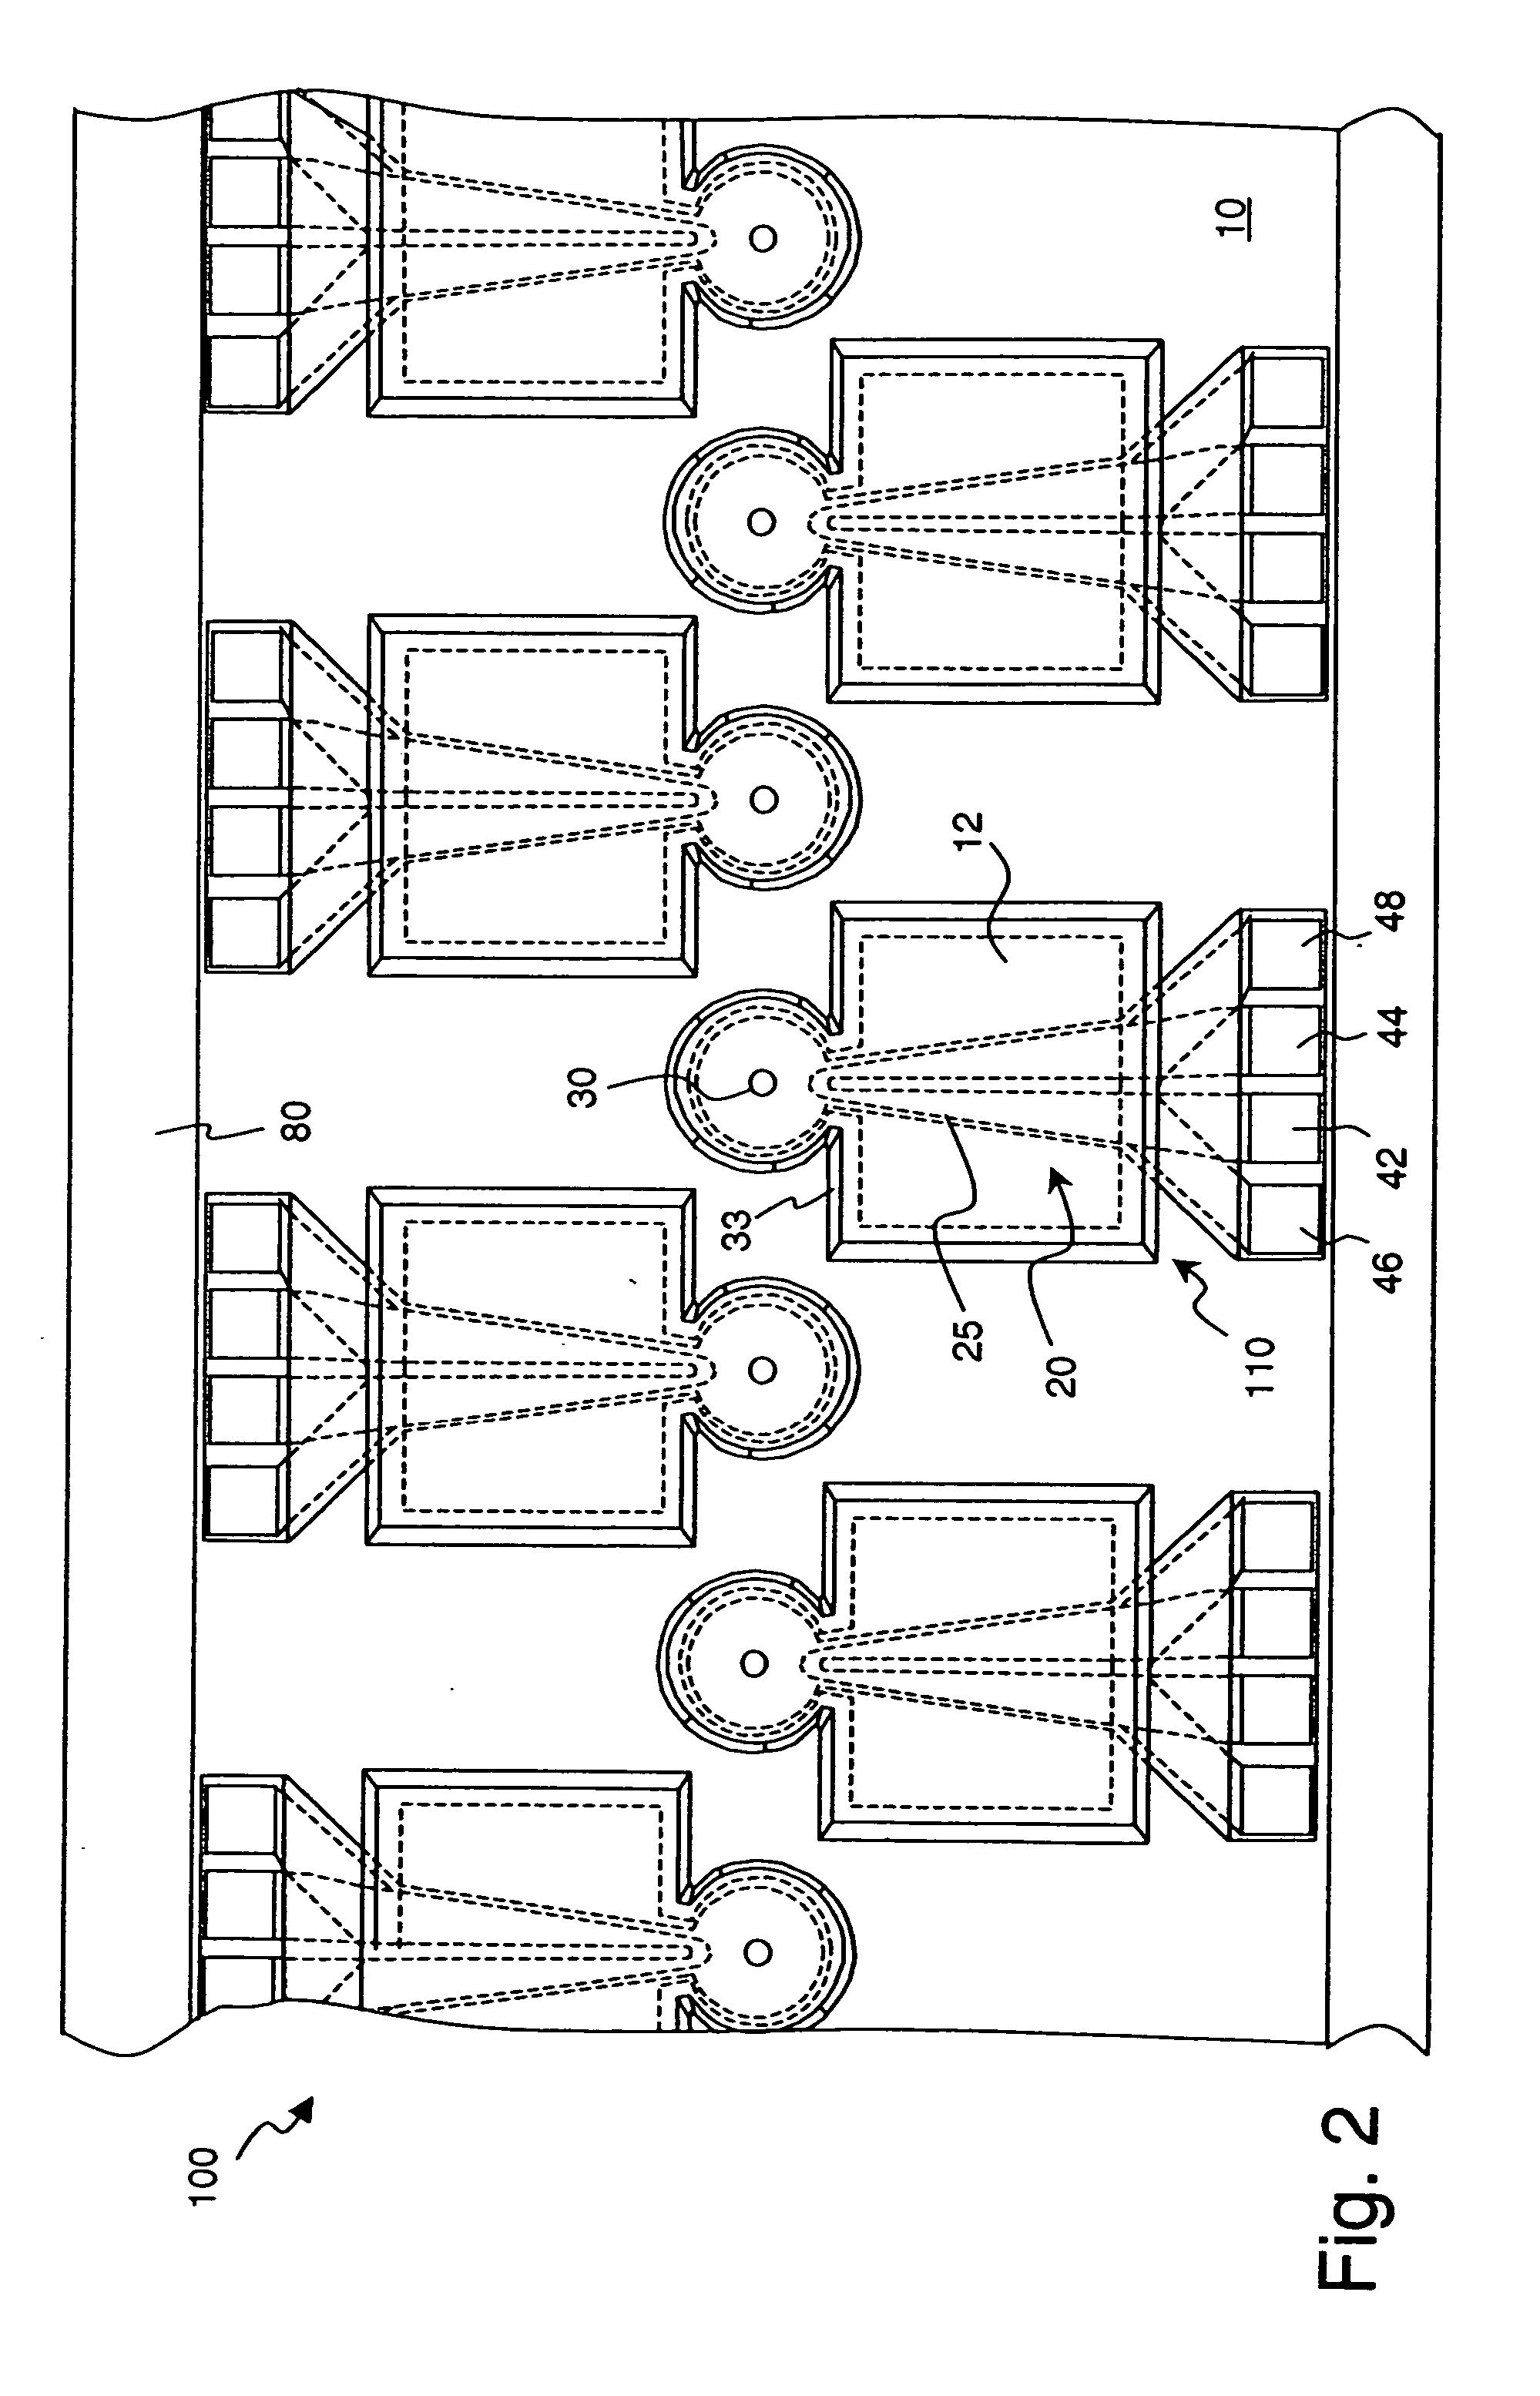 Tapered multi-layer thermal actuator and method of operating same